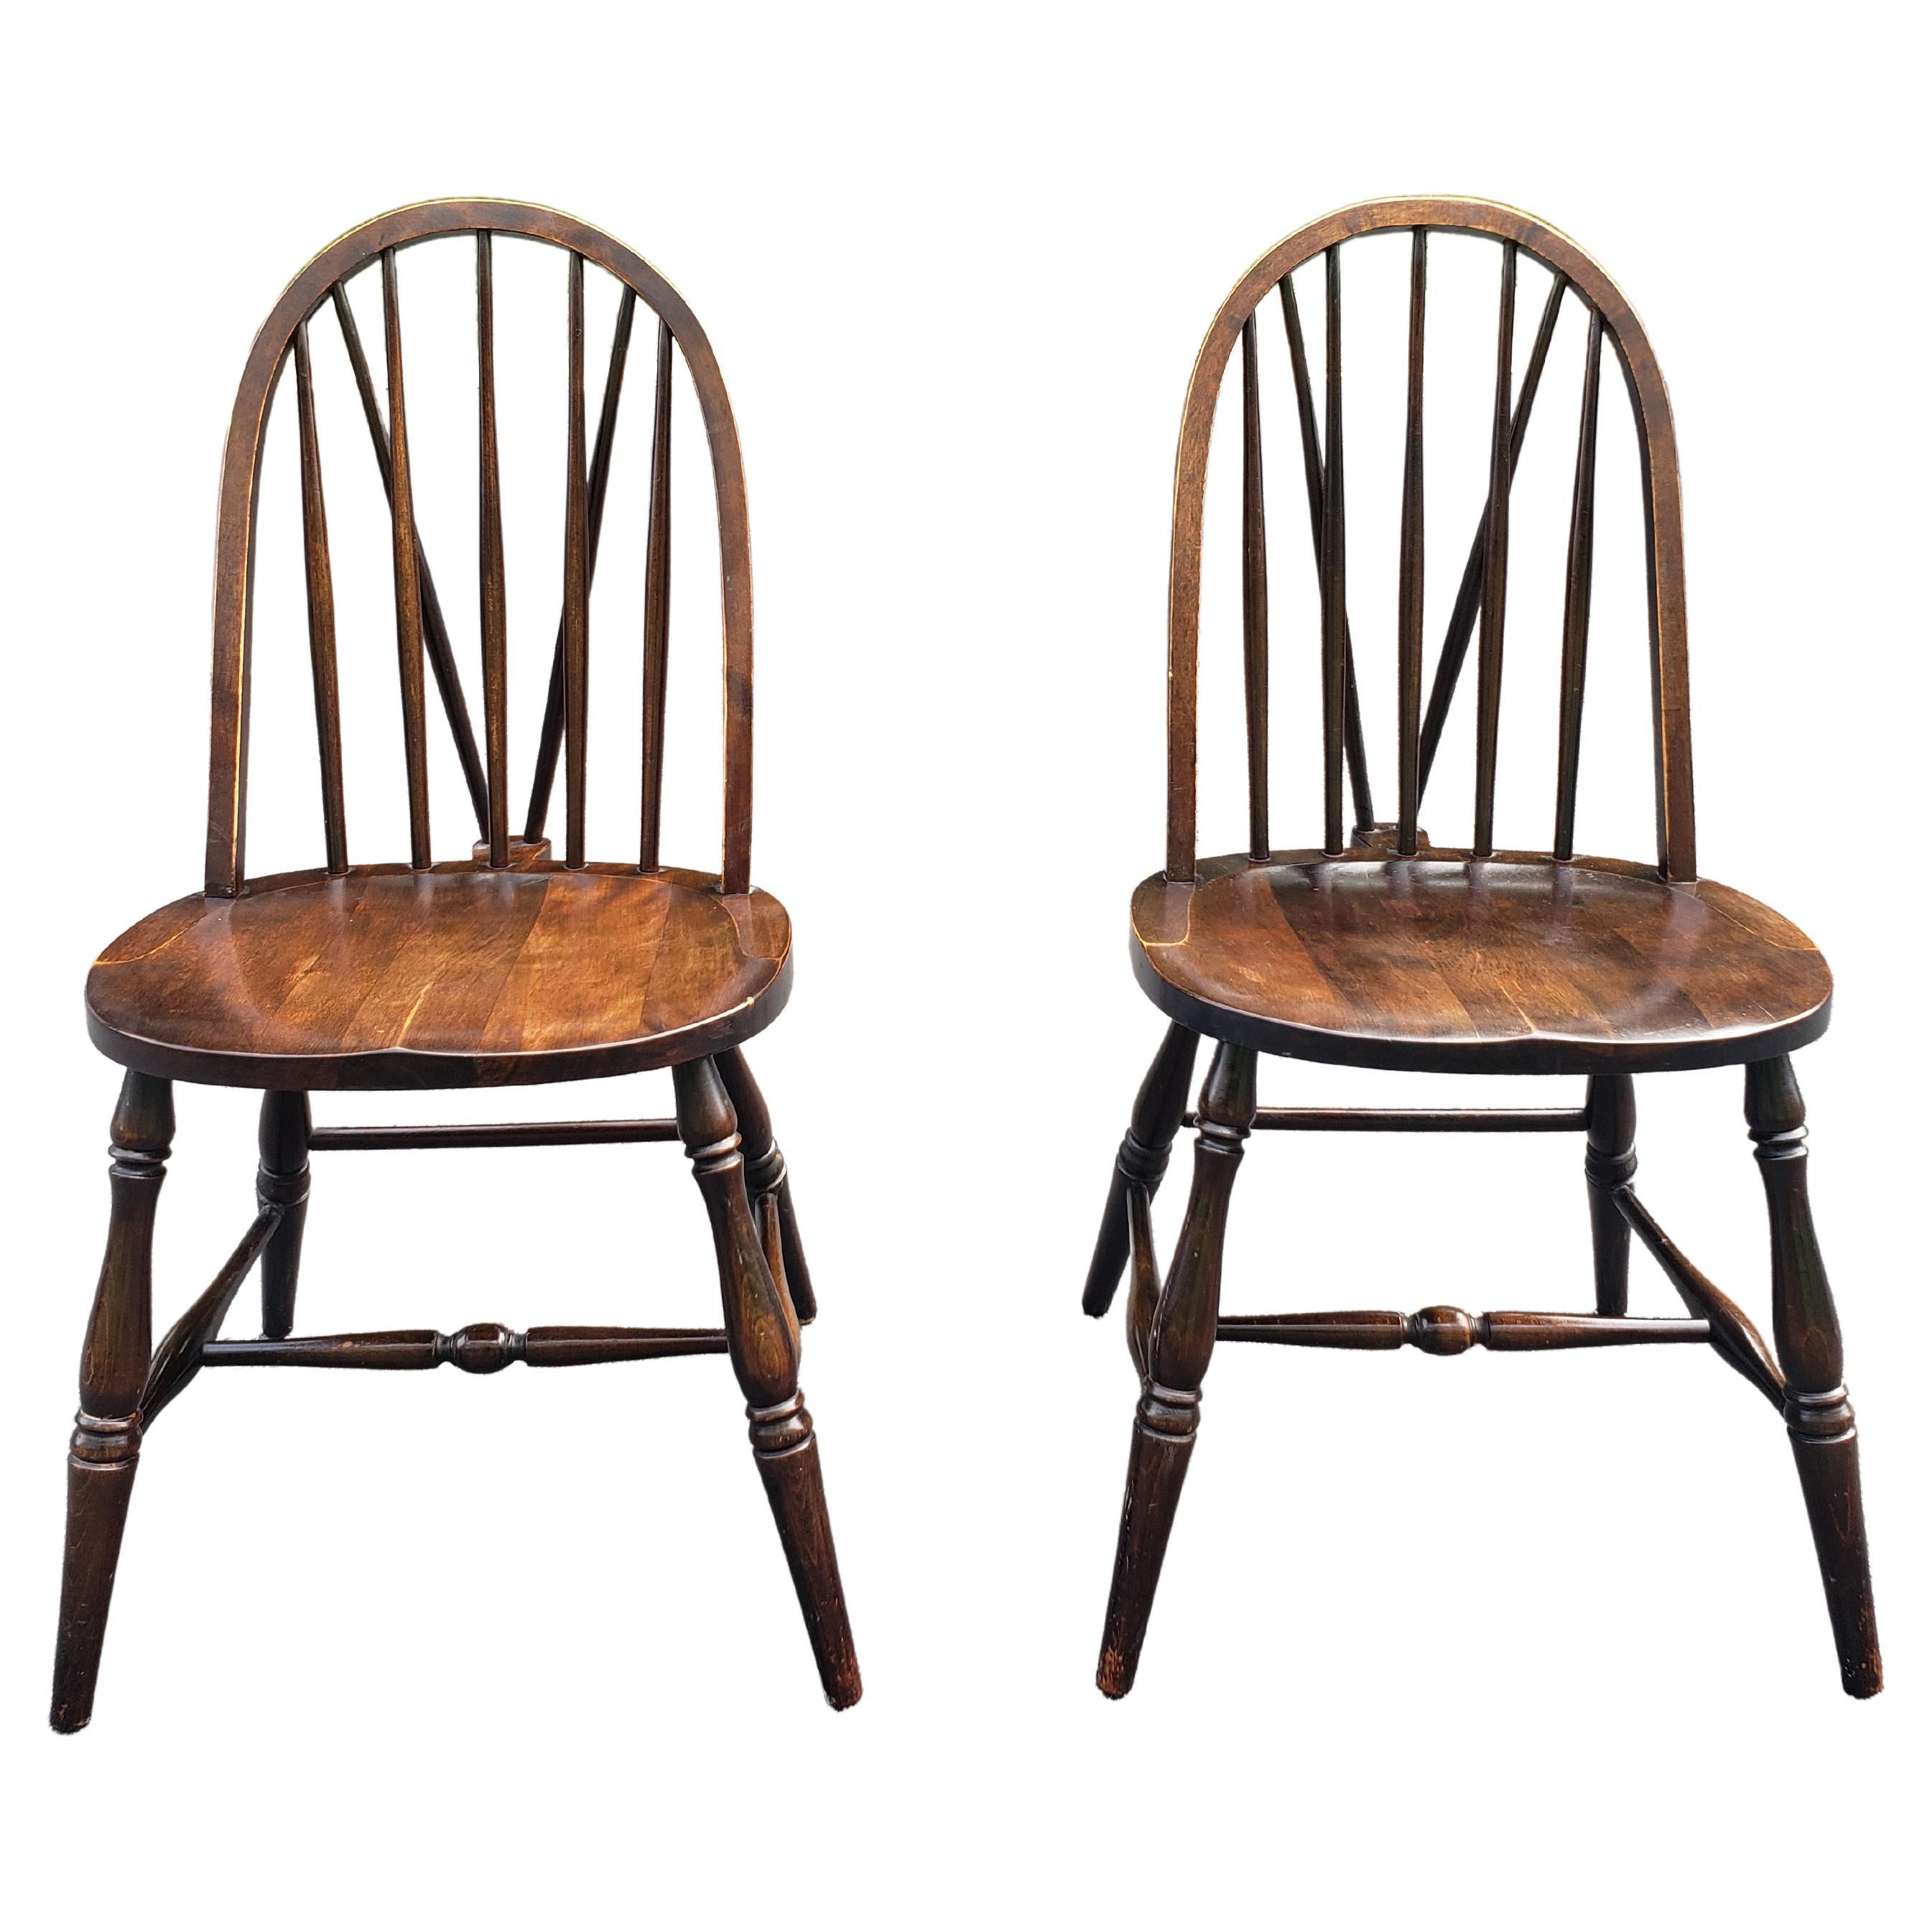 1900s Parkersburg Chair Walnut Brace Back Windsor Side Chairs, Pair